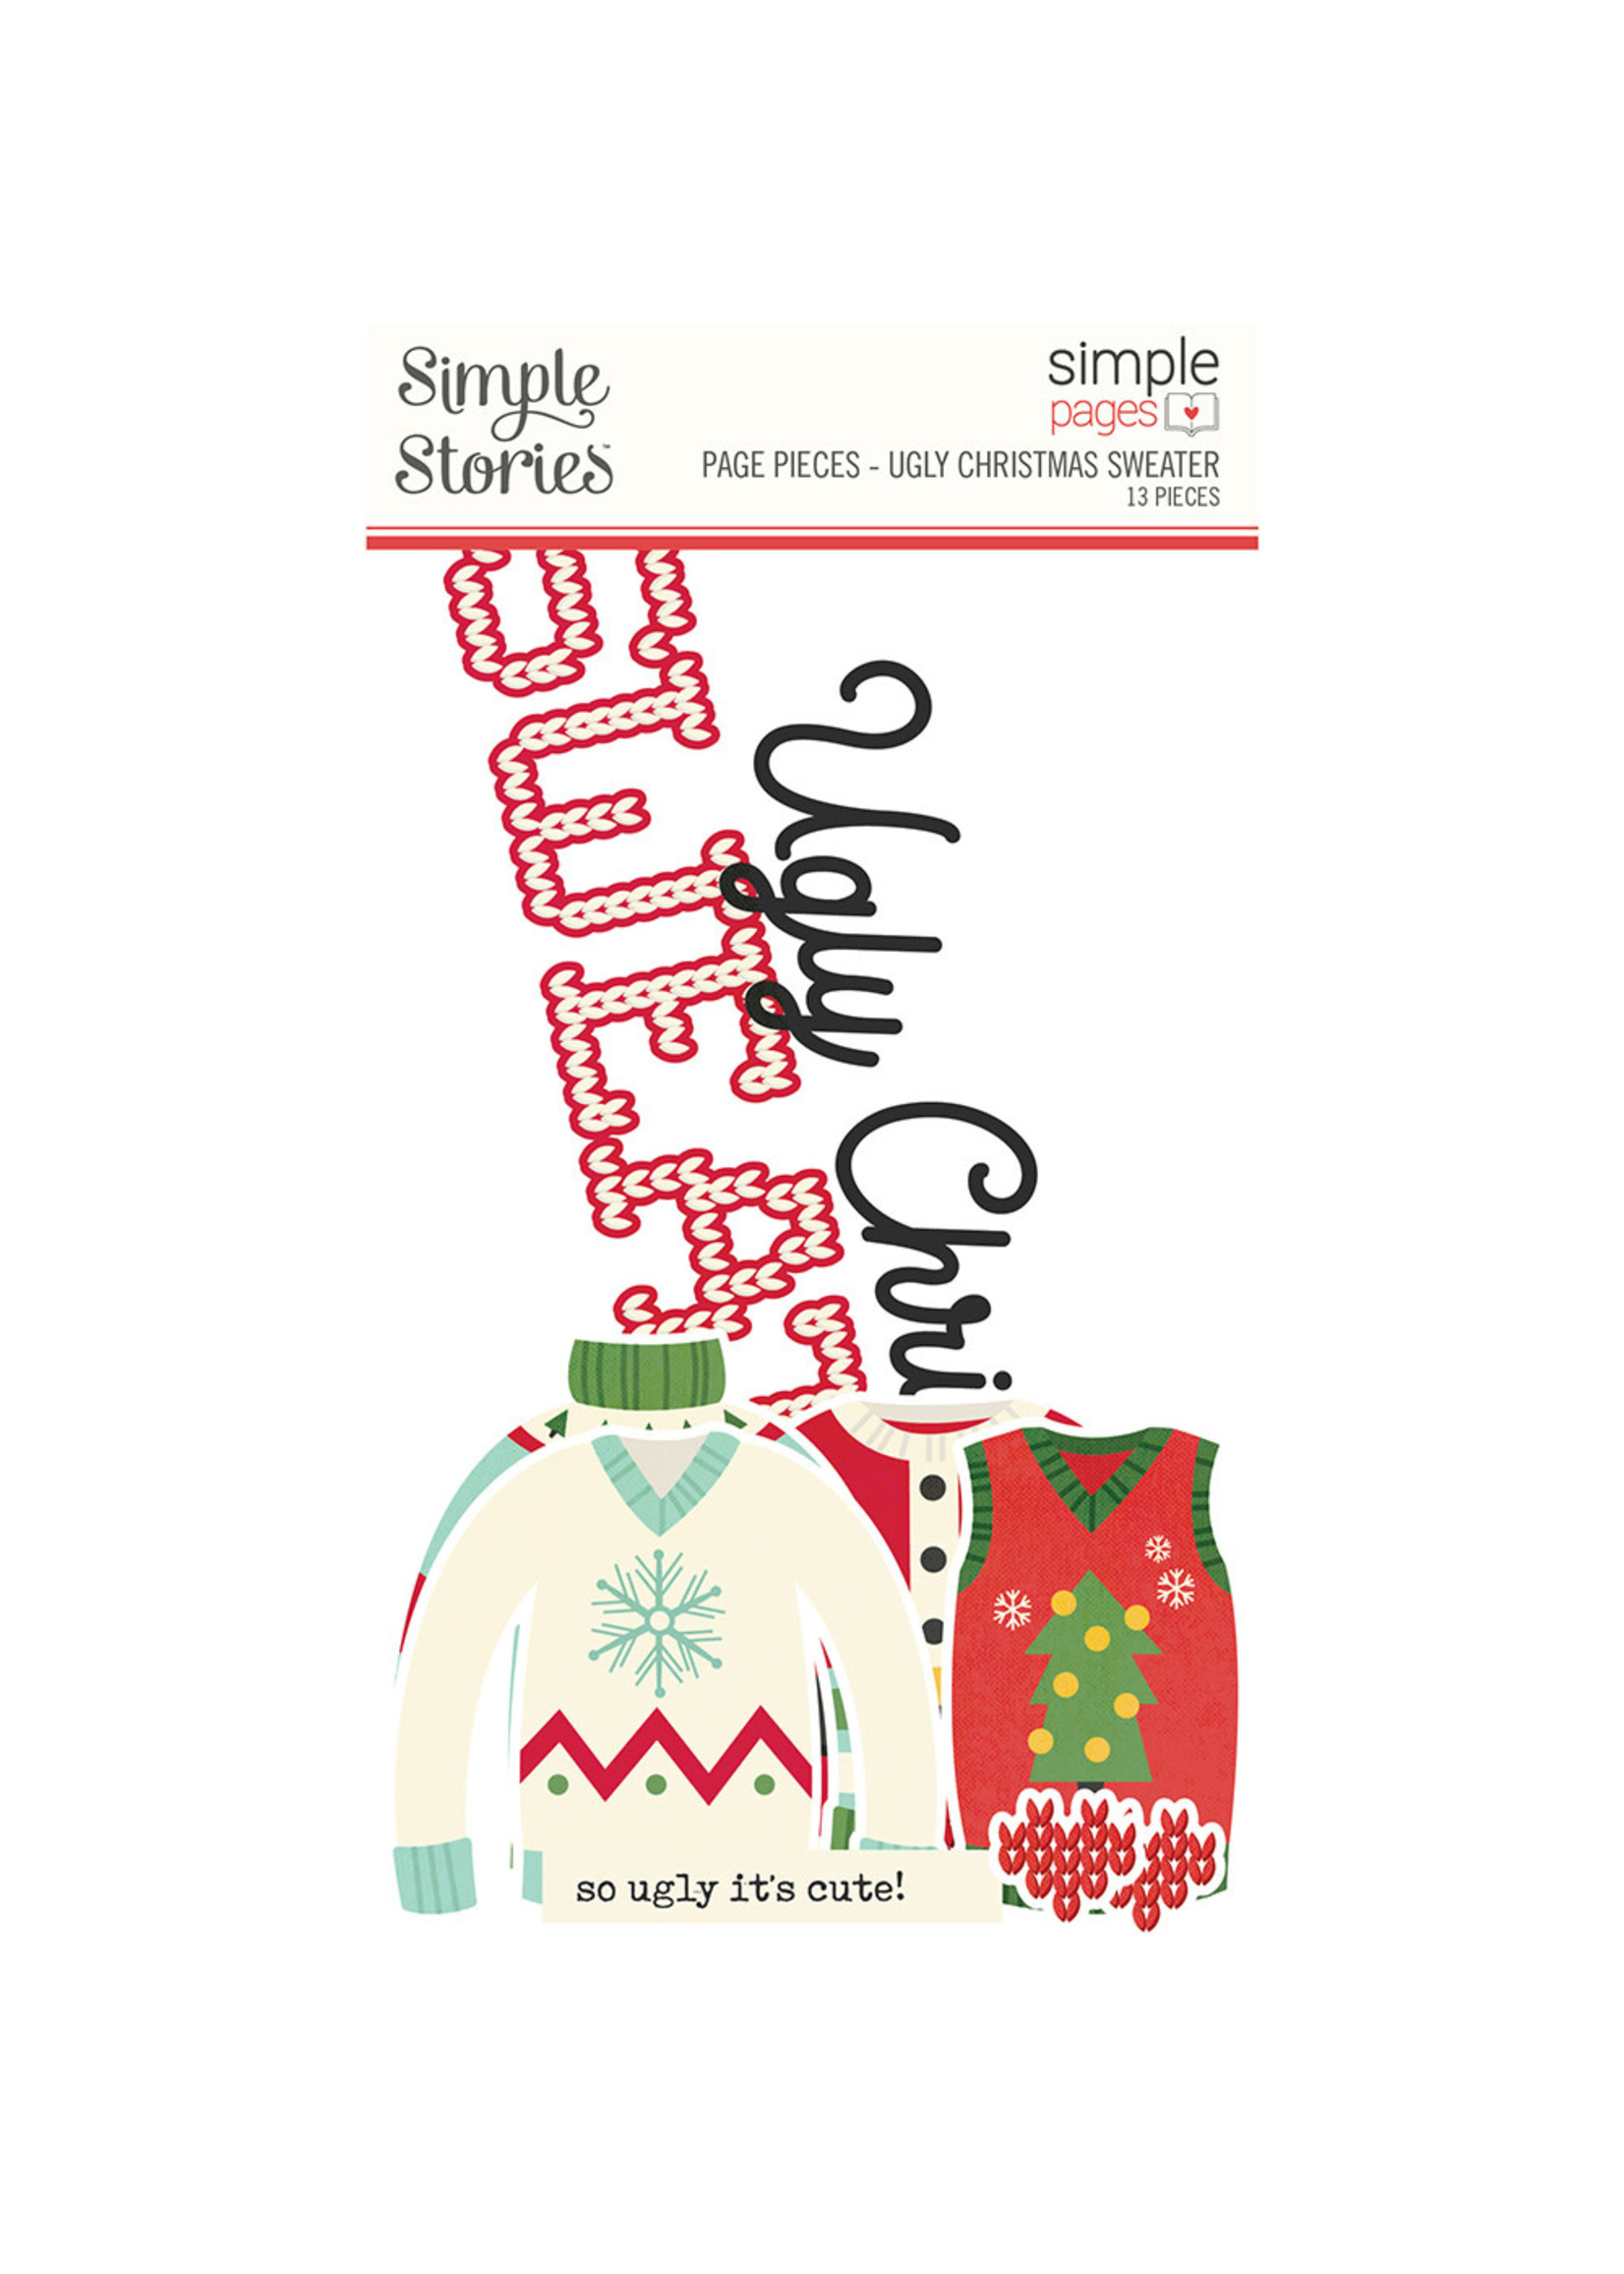 Simple Stories Simple Pages Page Pieces - Ugly Christmas Sweater